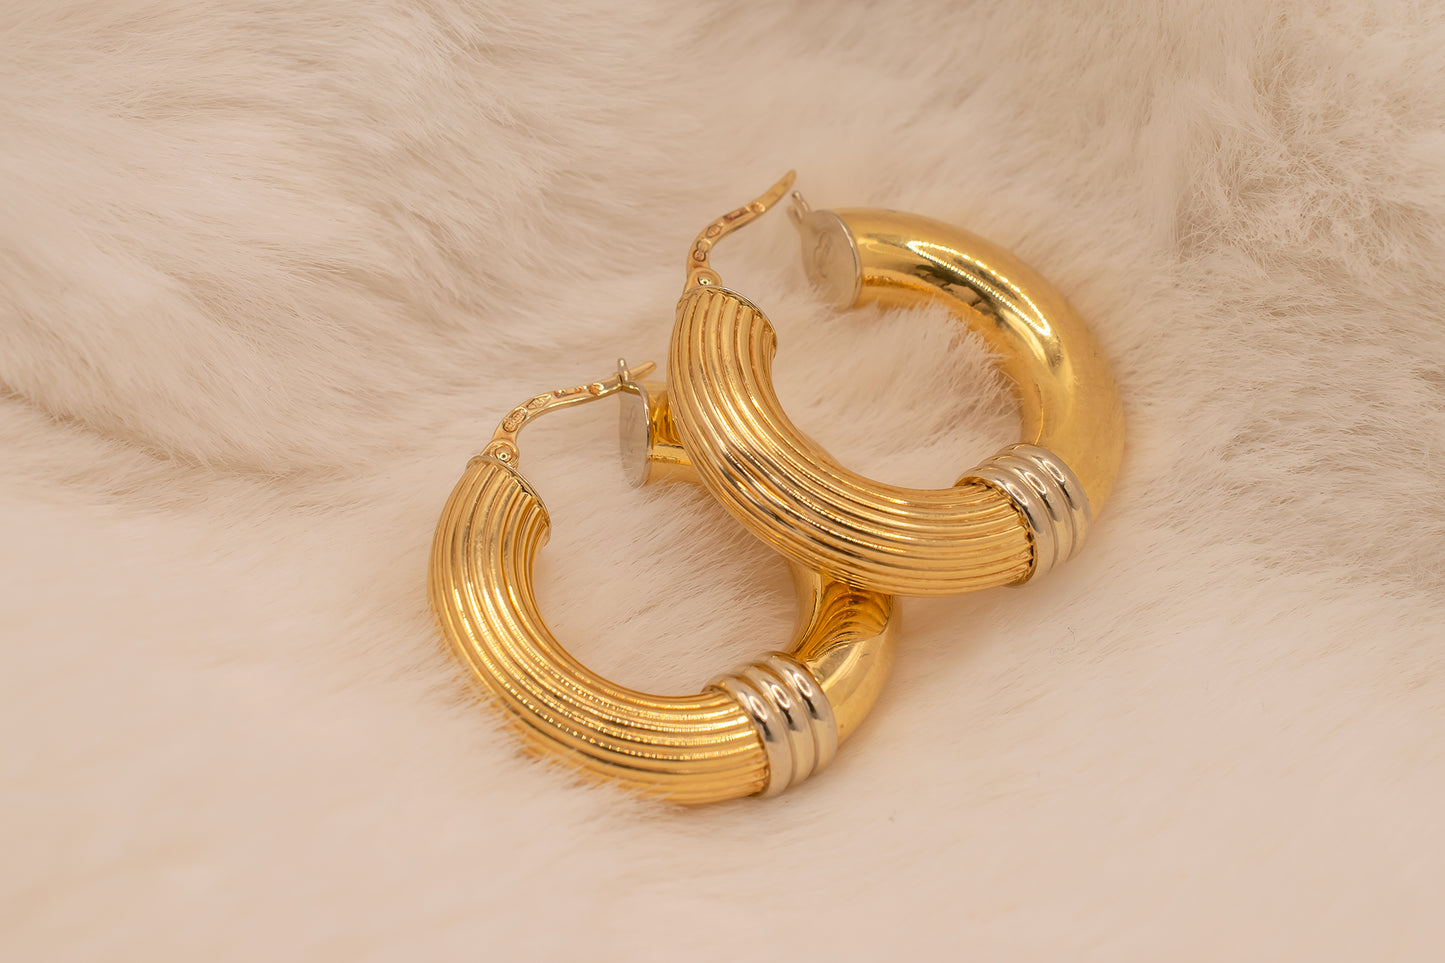 Vintage 90s 18k Yellow and White Gold Two Tone High Polish and Textured Hoop Earring 1 Inch